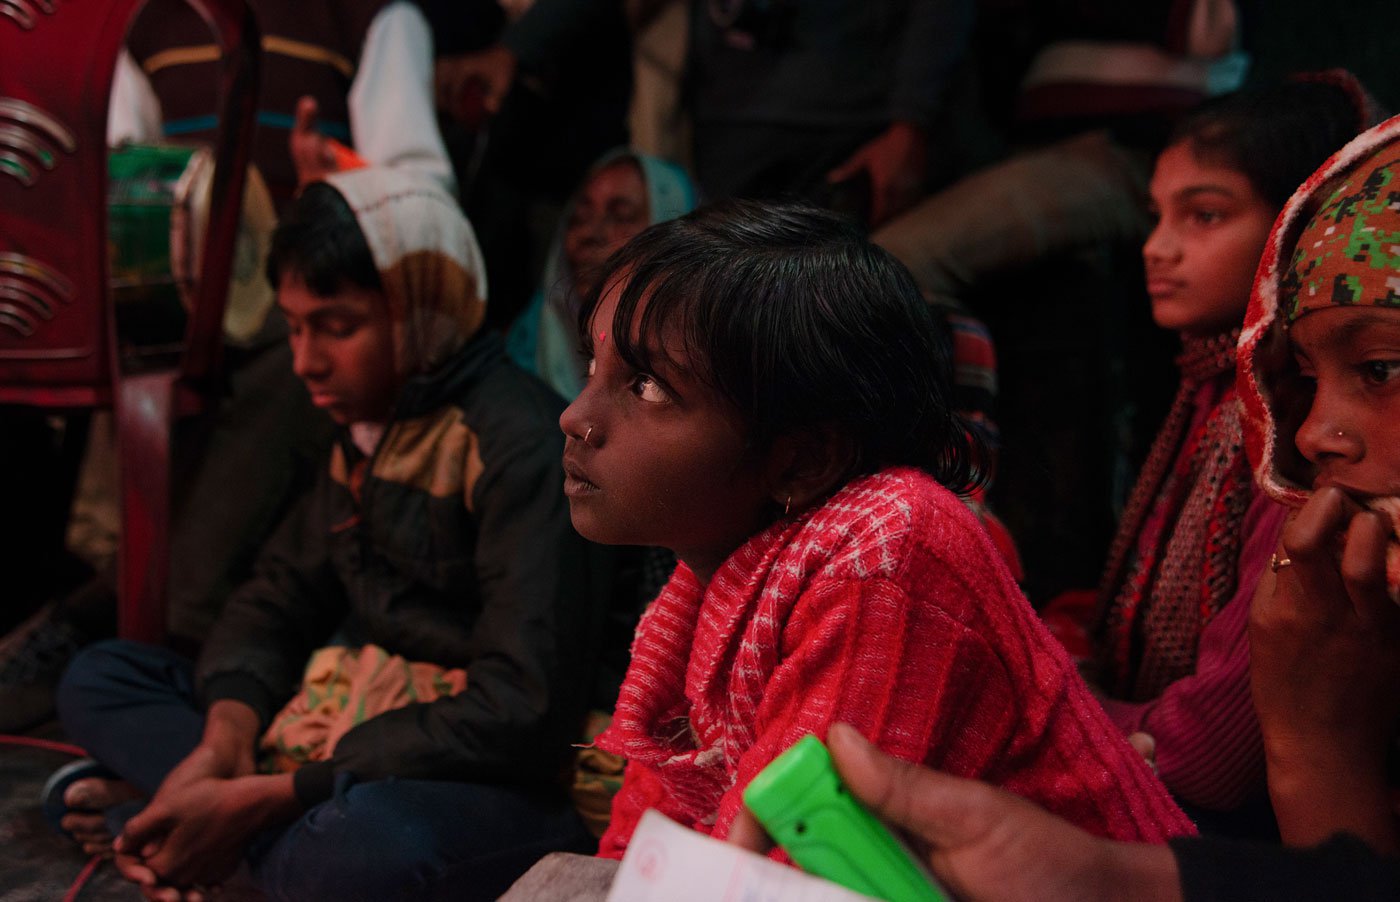 A child from Jawahar Colony village in the audience is completely engrossed in the show